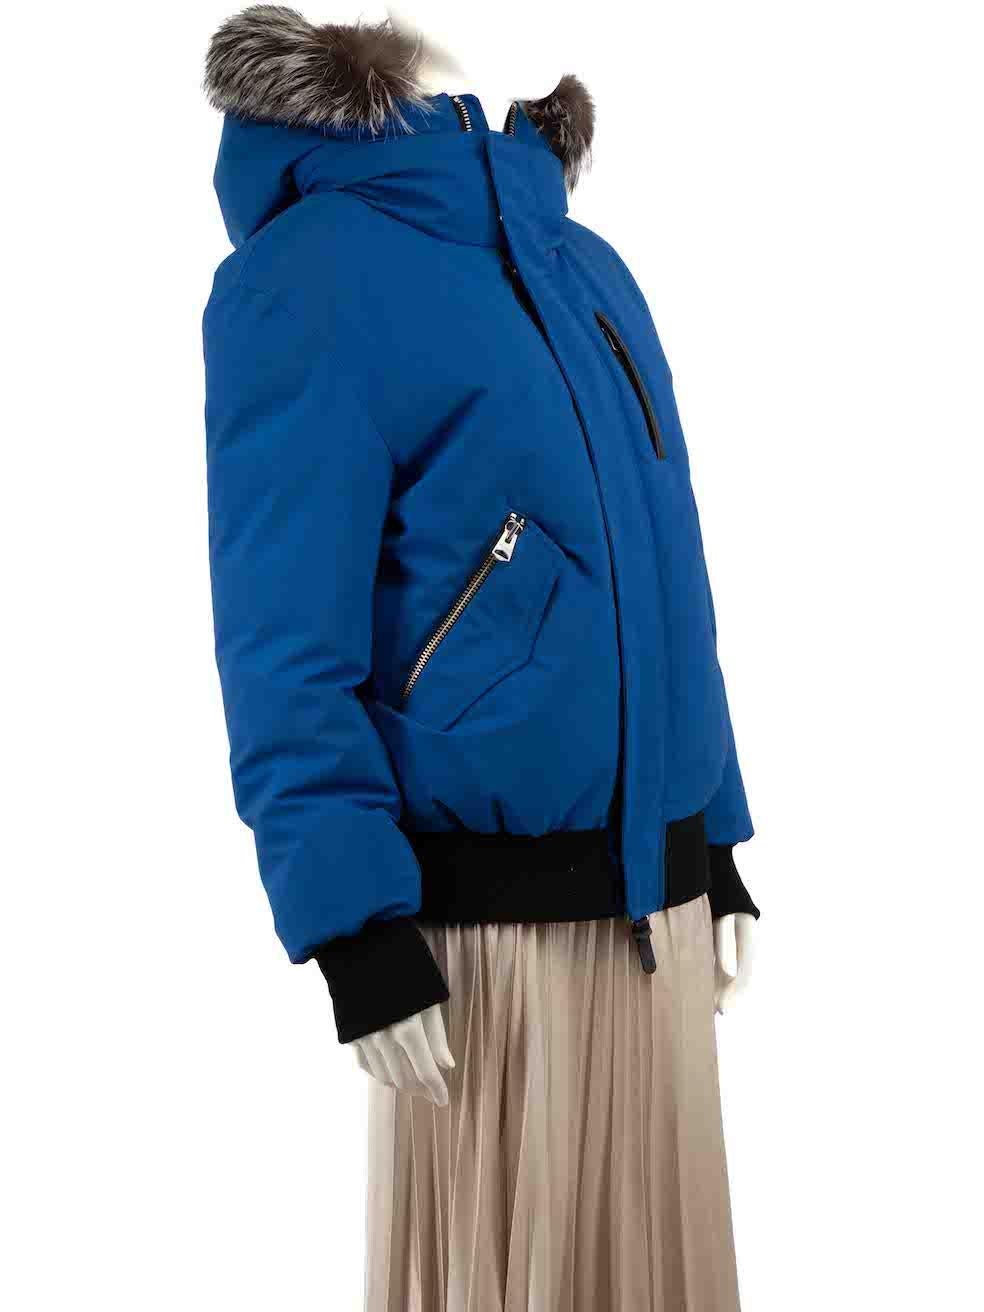 CONDITION is Very good. Hardly any visible wear to coat is evident on this used Mackage designer resale item.
 
 
 
 Details
 
 
 Blue
 
 Synthetic
 
 Shell jacket
 
 Front double zip closure with snap buttons
 
 Fur lined hood
 
 Zip detachable